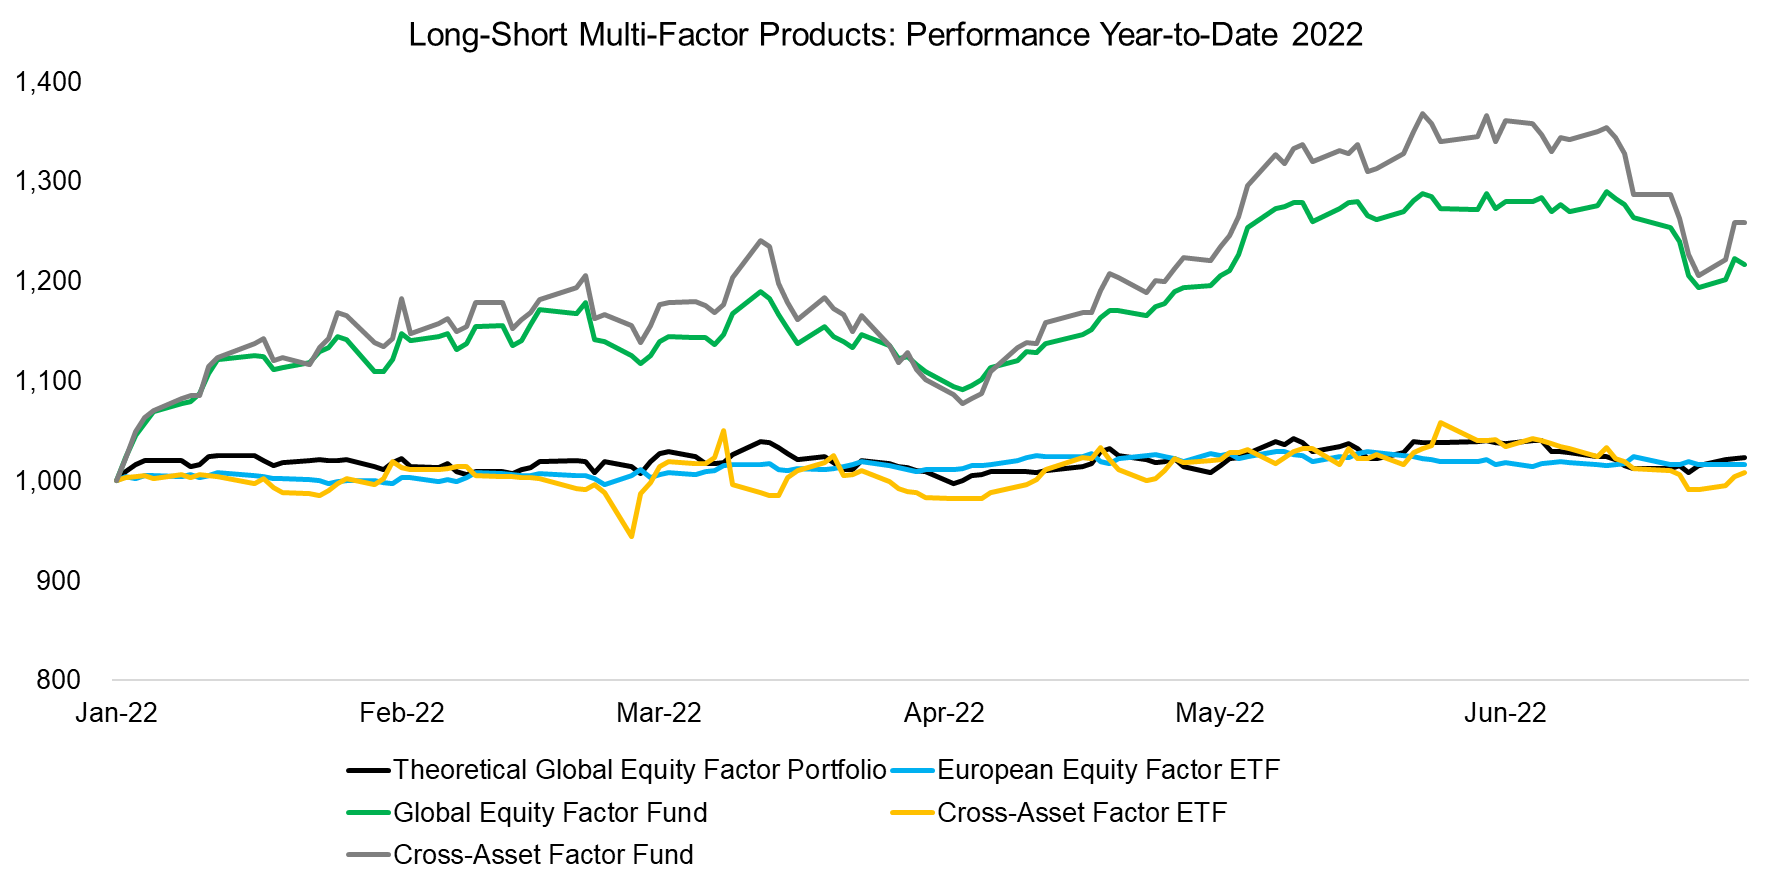 Long-Short Multi-Factor Products Performance Year-to-Date 2022